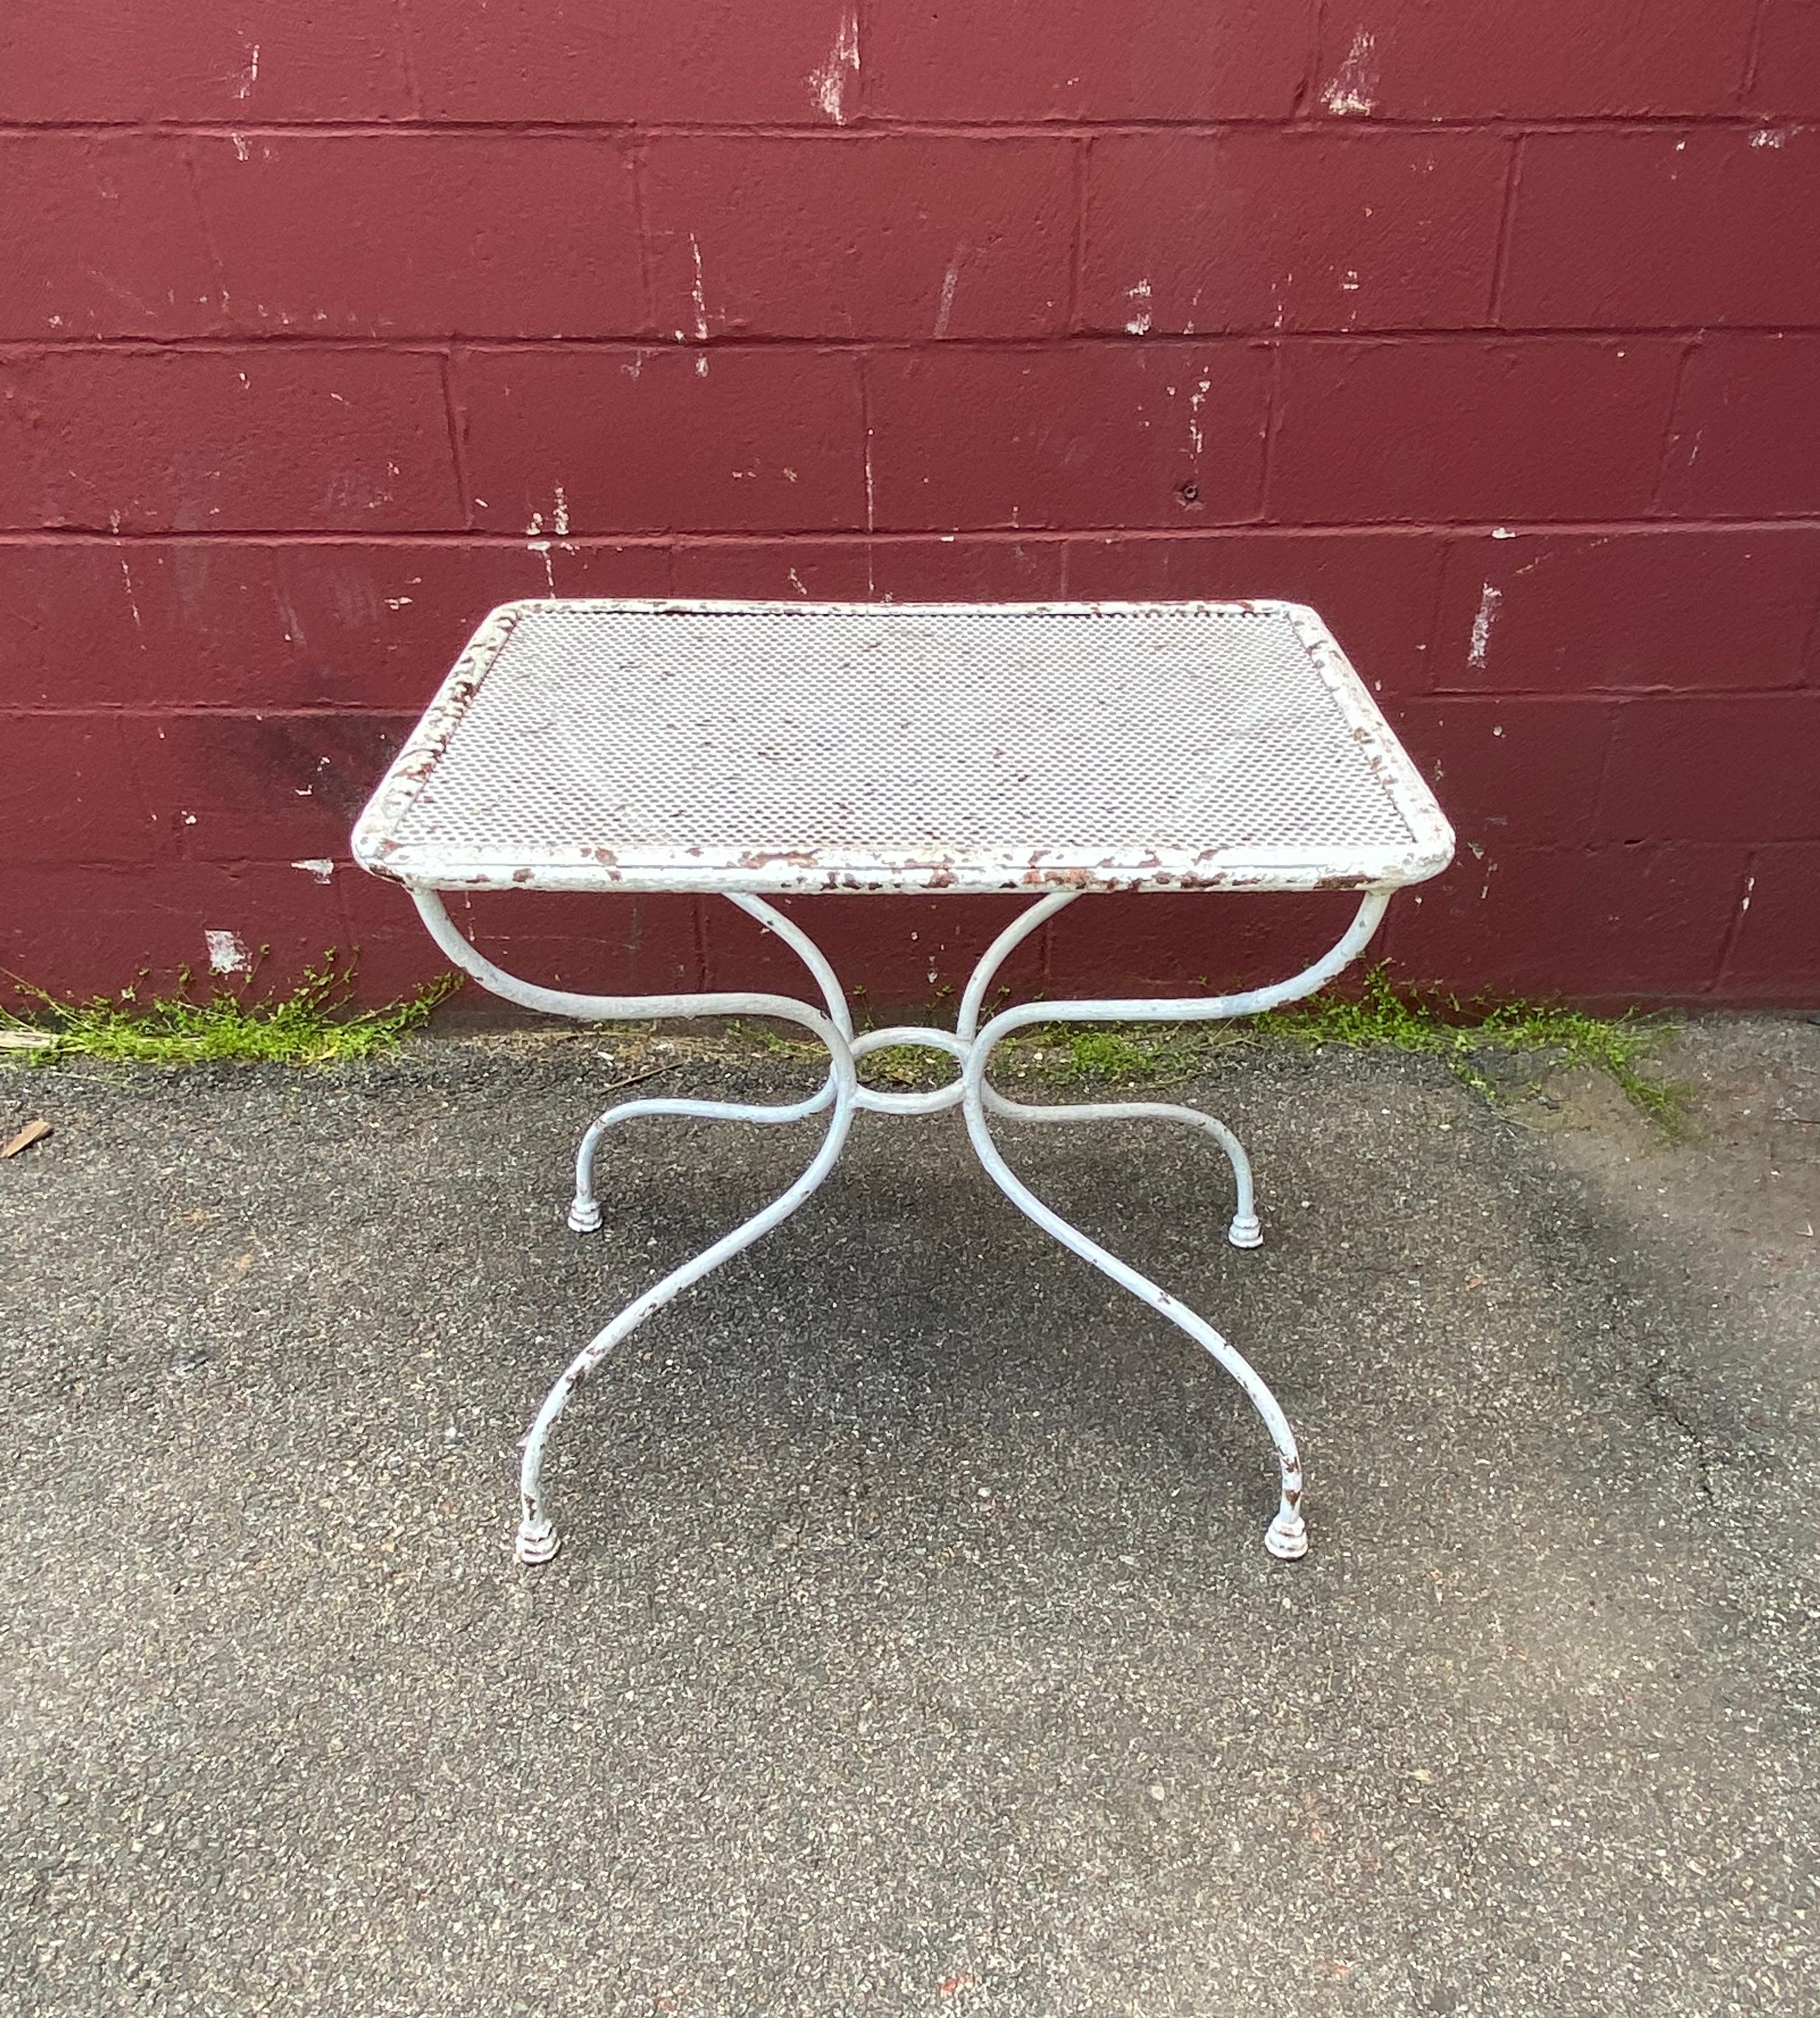 This charming French garden table from the 1920s is the perfect addition to any patio, terrace, or garden. Its perforated top allows for drainage, making it ideal for outdoor use. The curved legs and center ring provide stability and a touch of